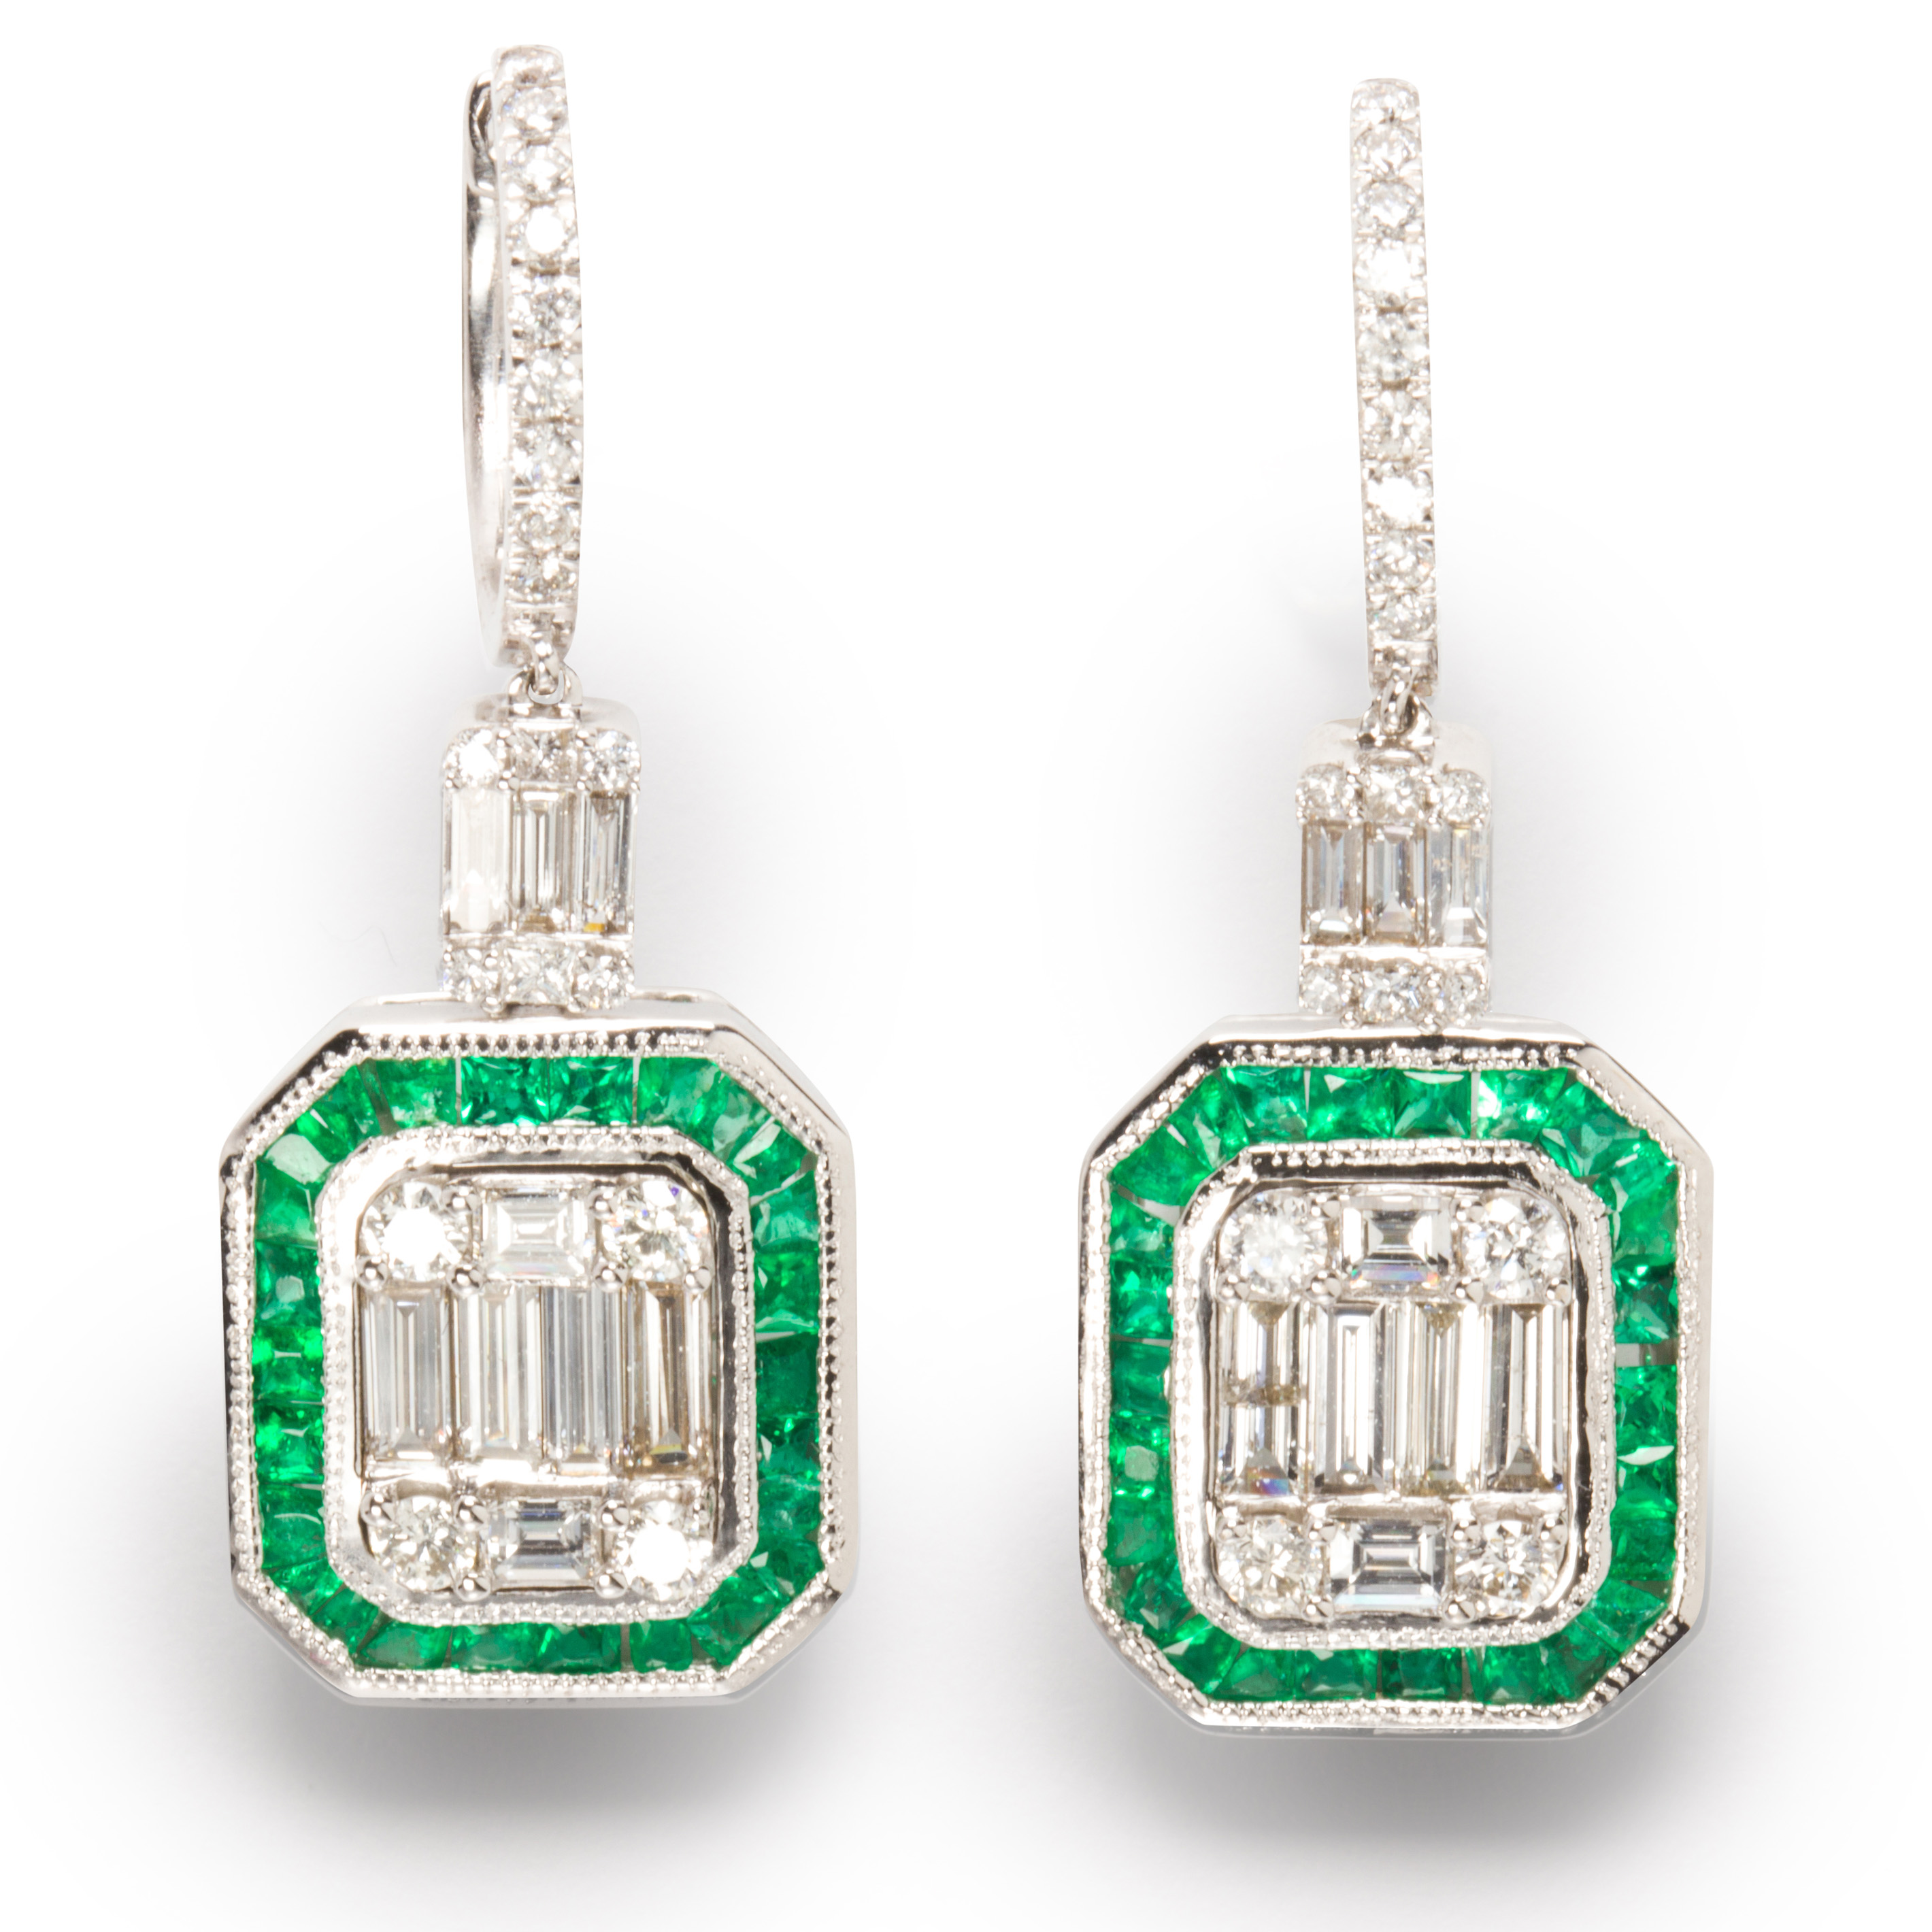 A PAIR OF EMERALD, DIAMOND AND